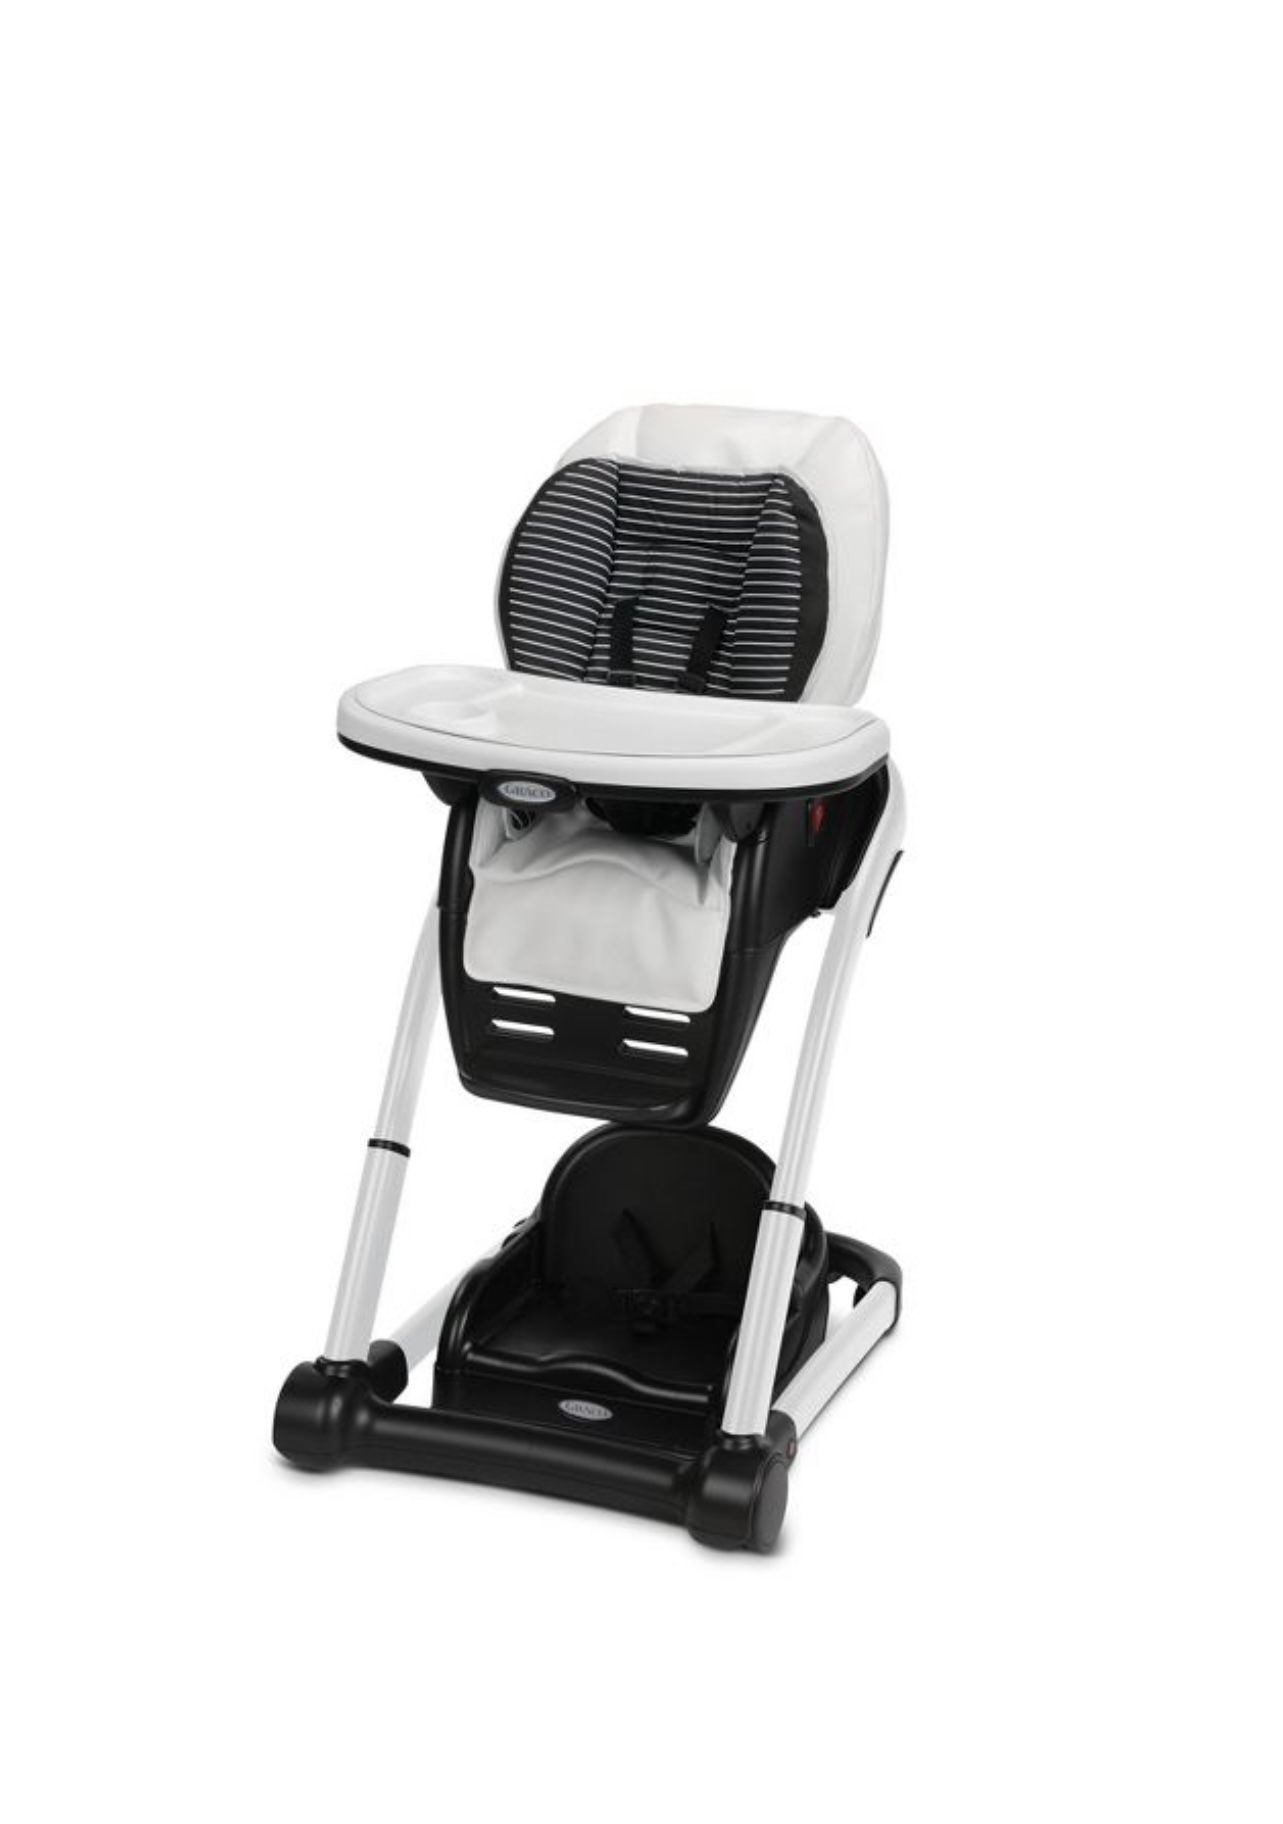 Graco Infant/Toddler Highchair 